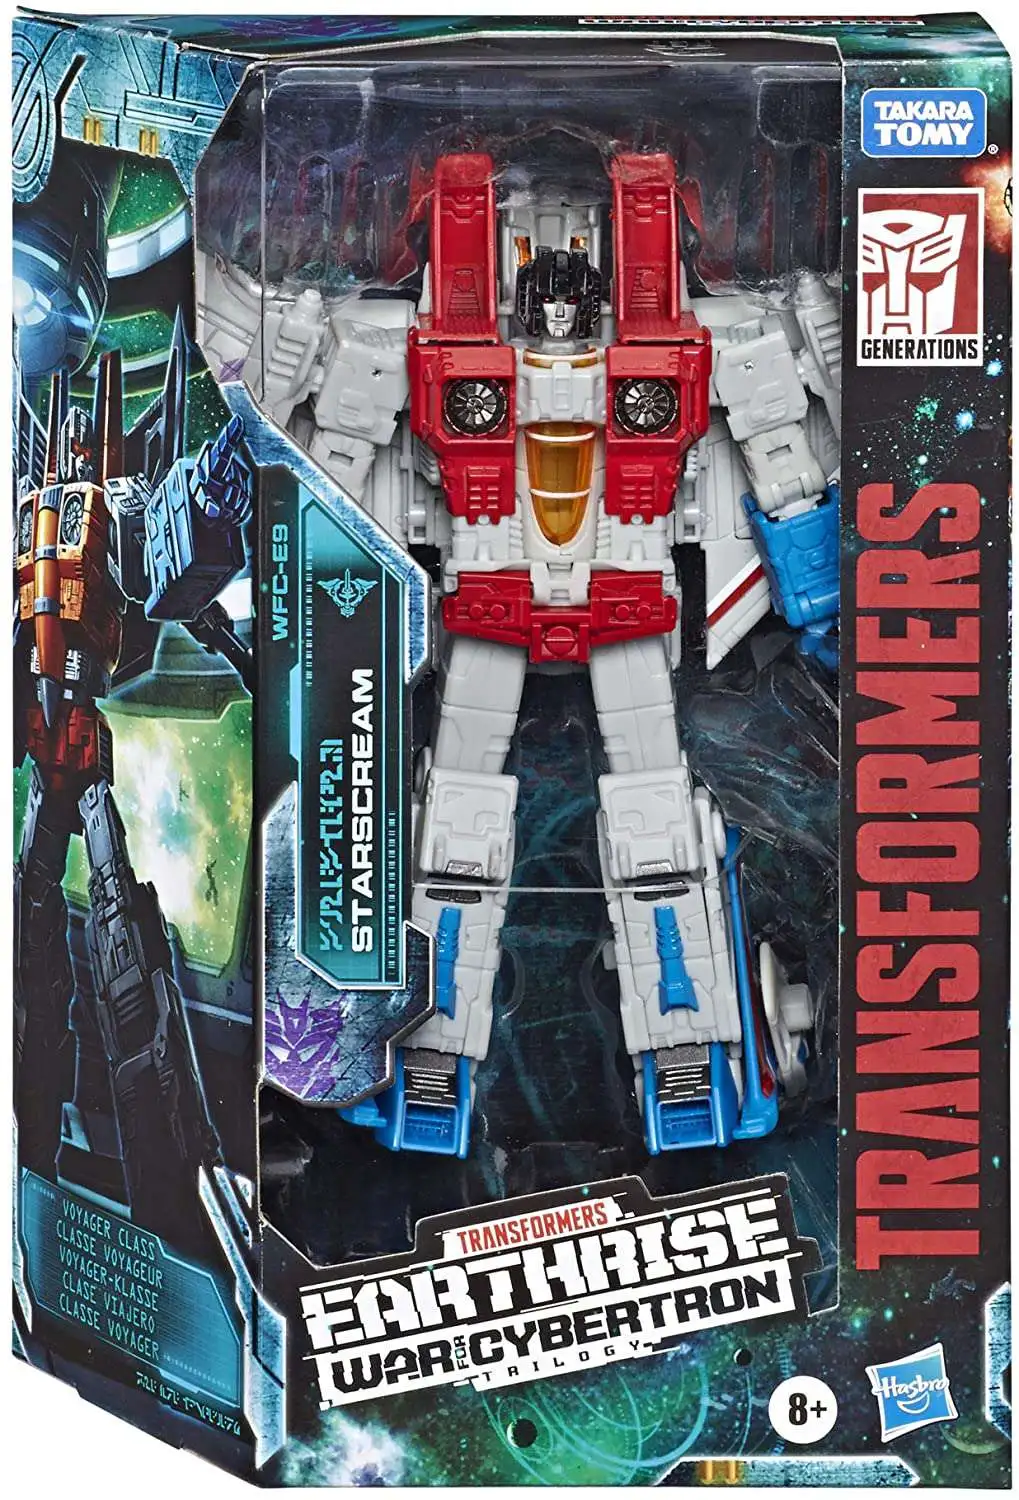 Hasbro WFCE29 Transformers Generations War for Cybertron Earthrise Voyager... 